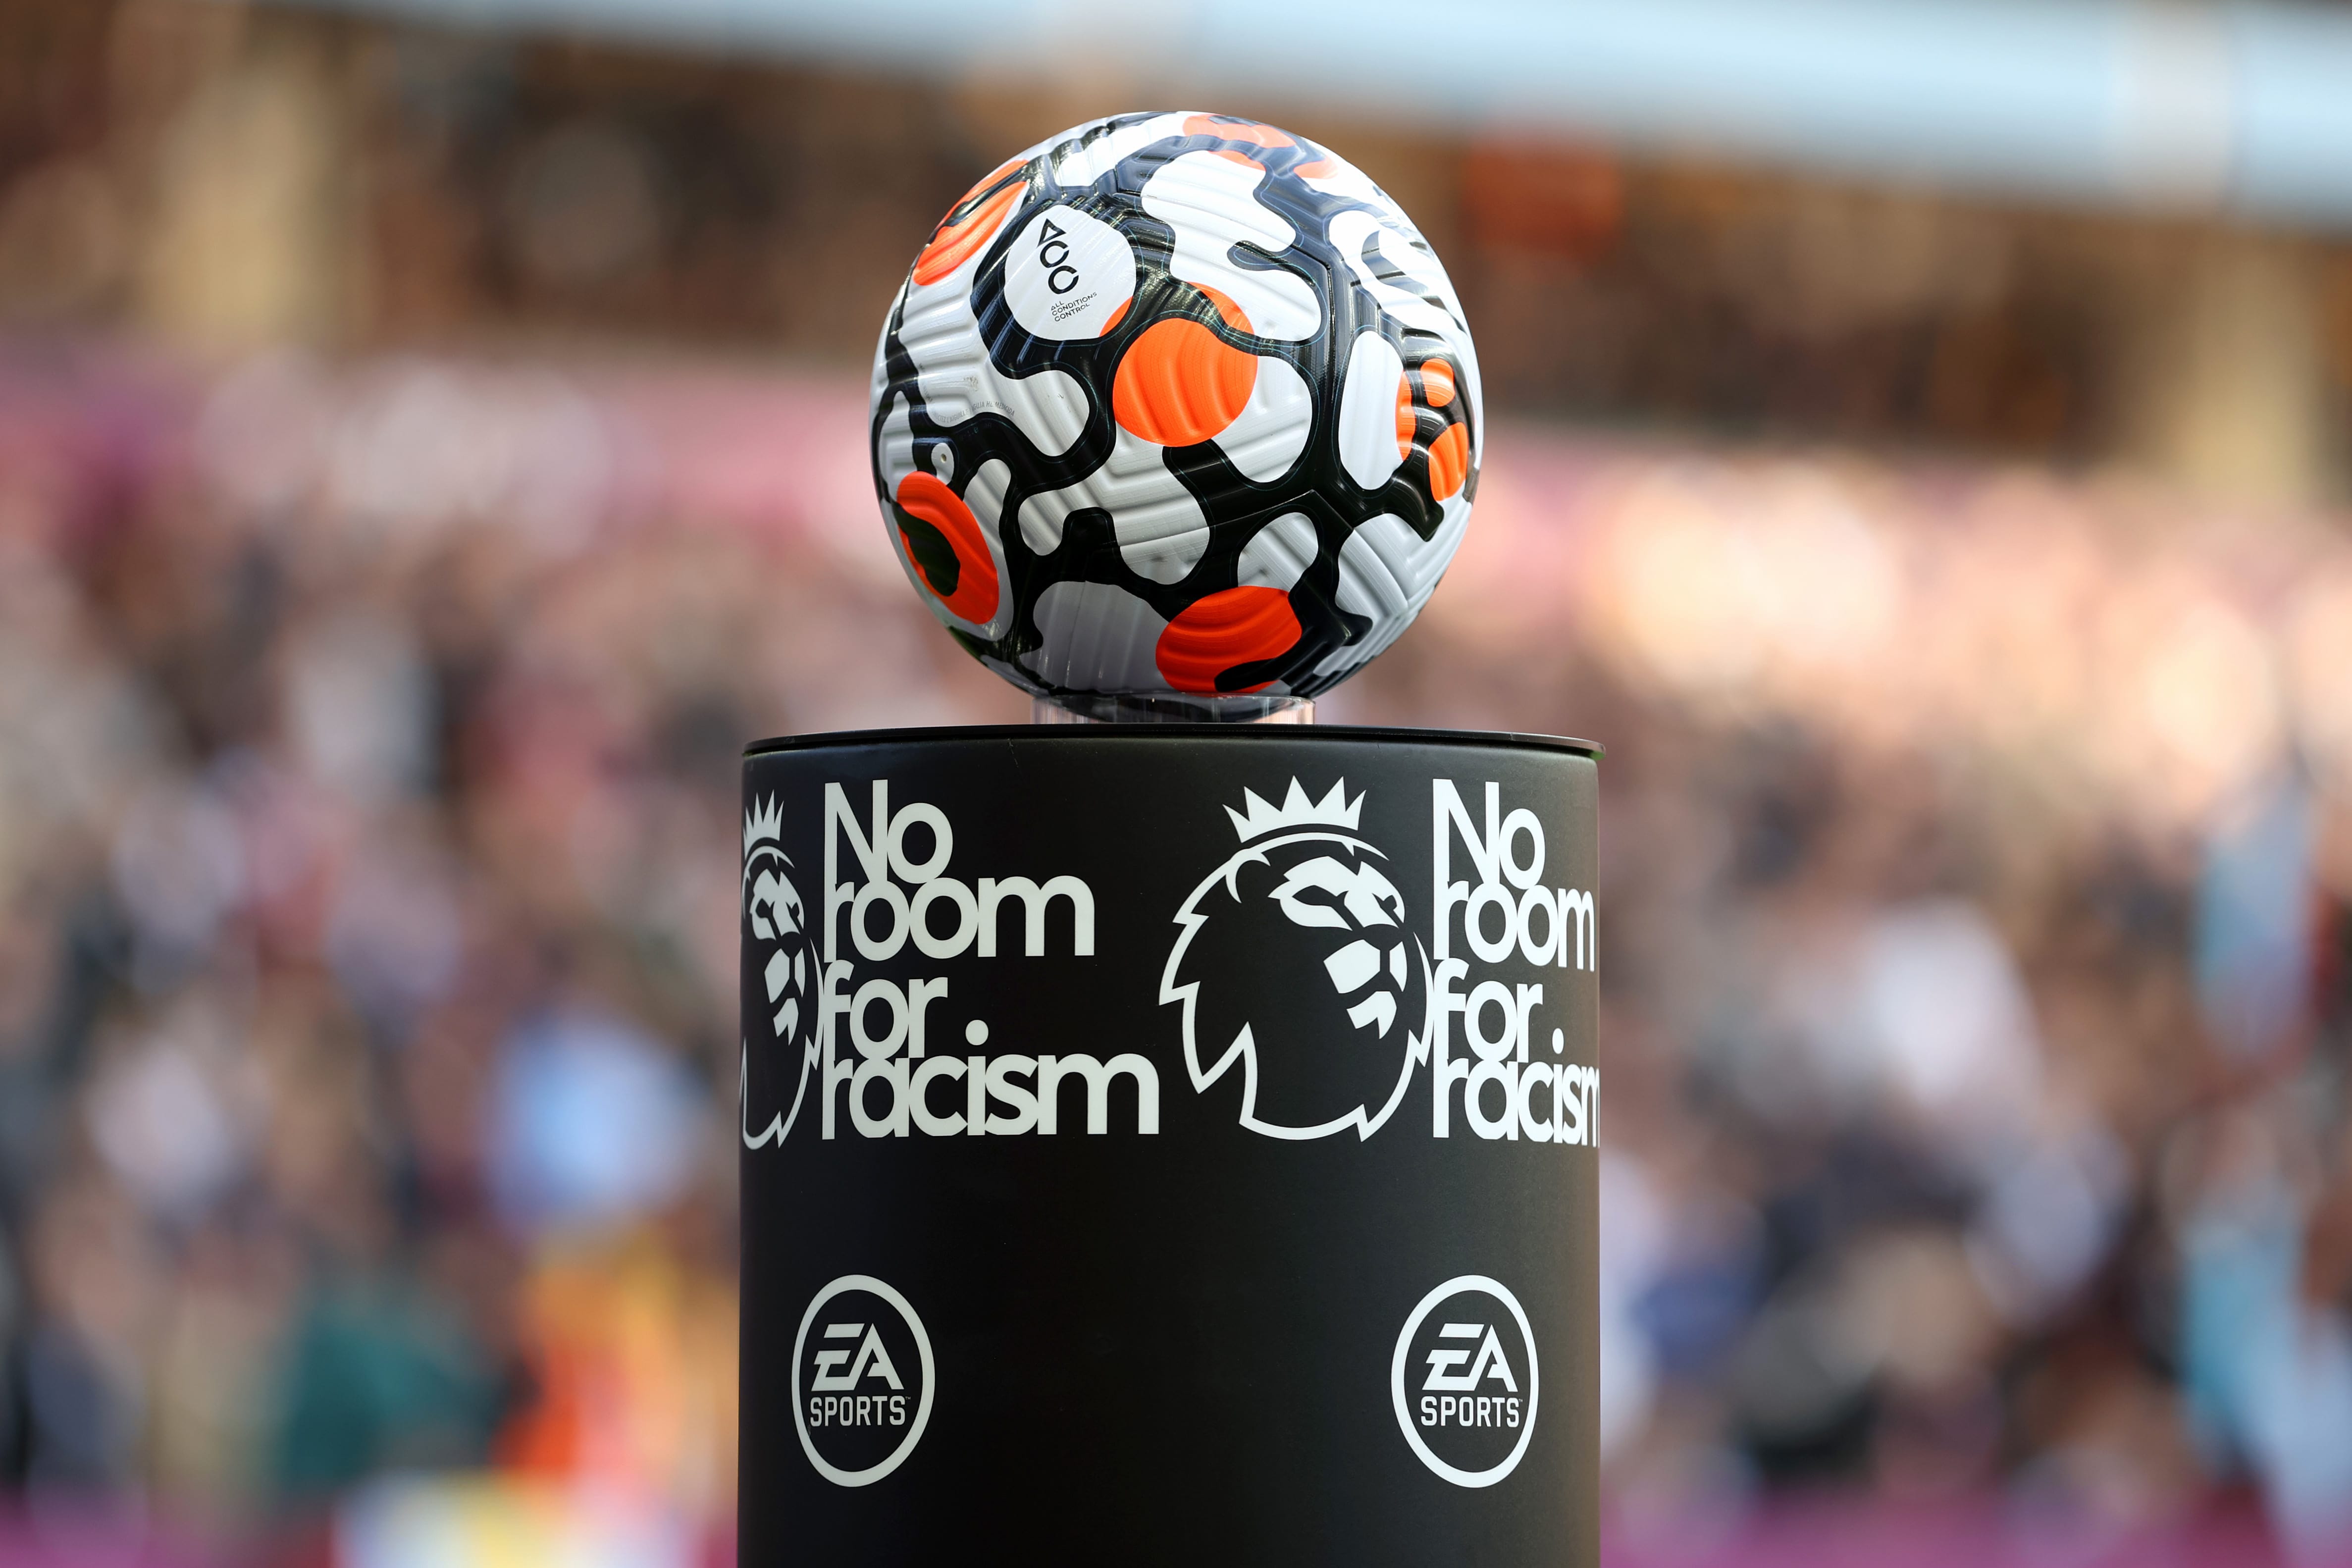 Premier League Primary Stars | No Room for Racism - Youth voices